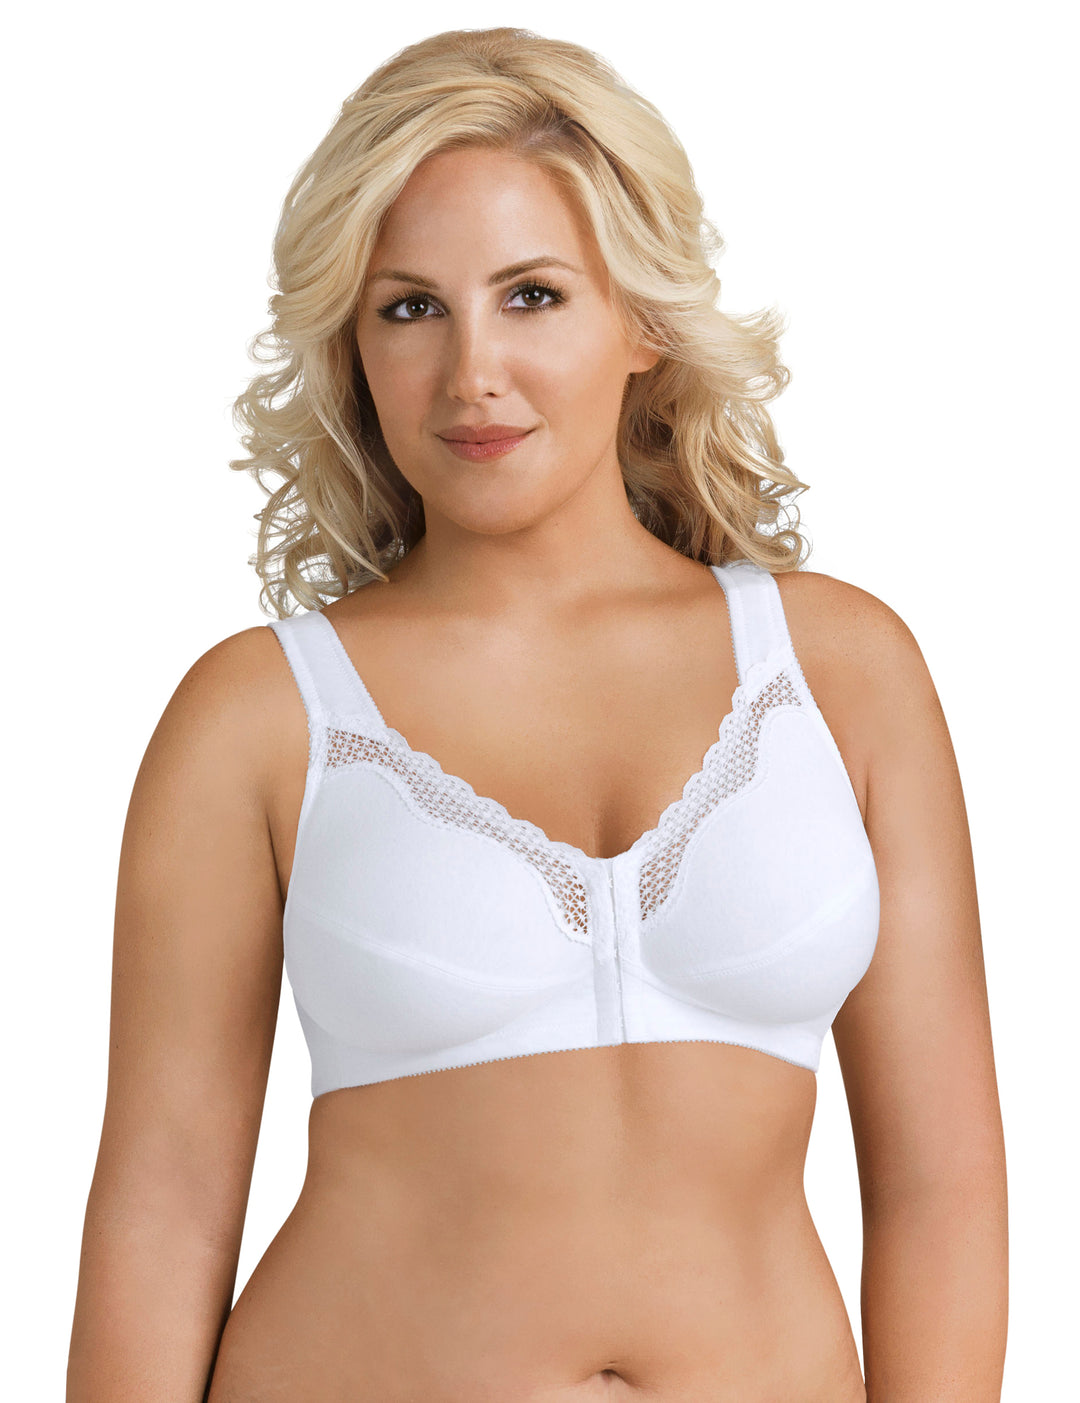 FULLY® Front Close Cotton Posture Bra with Lace